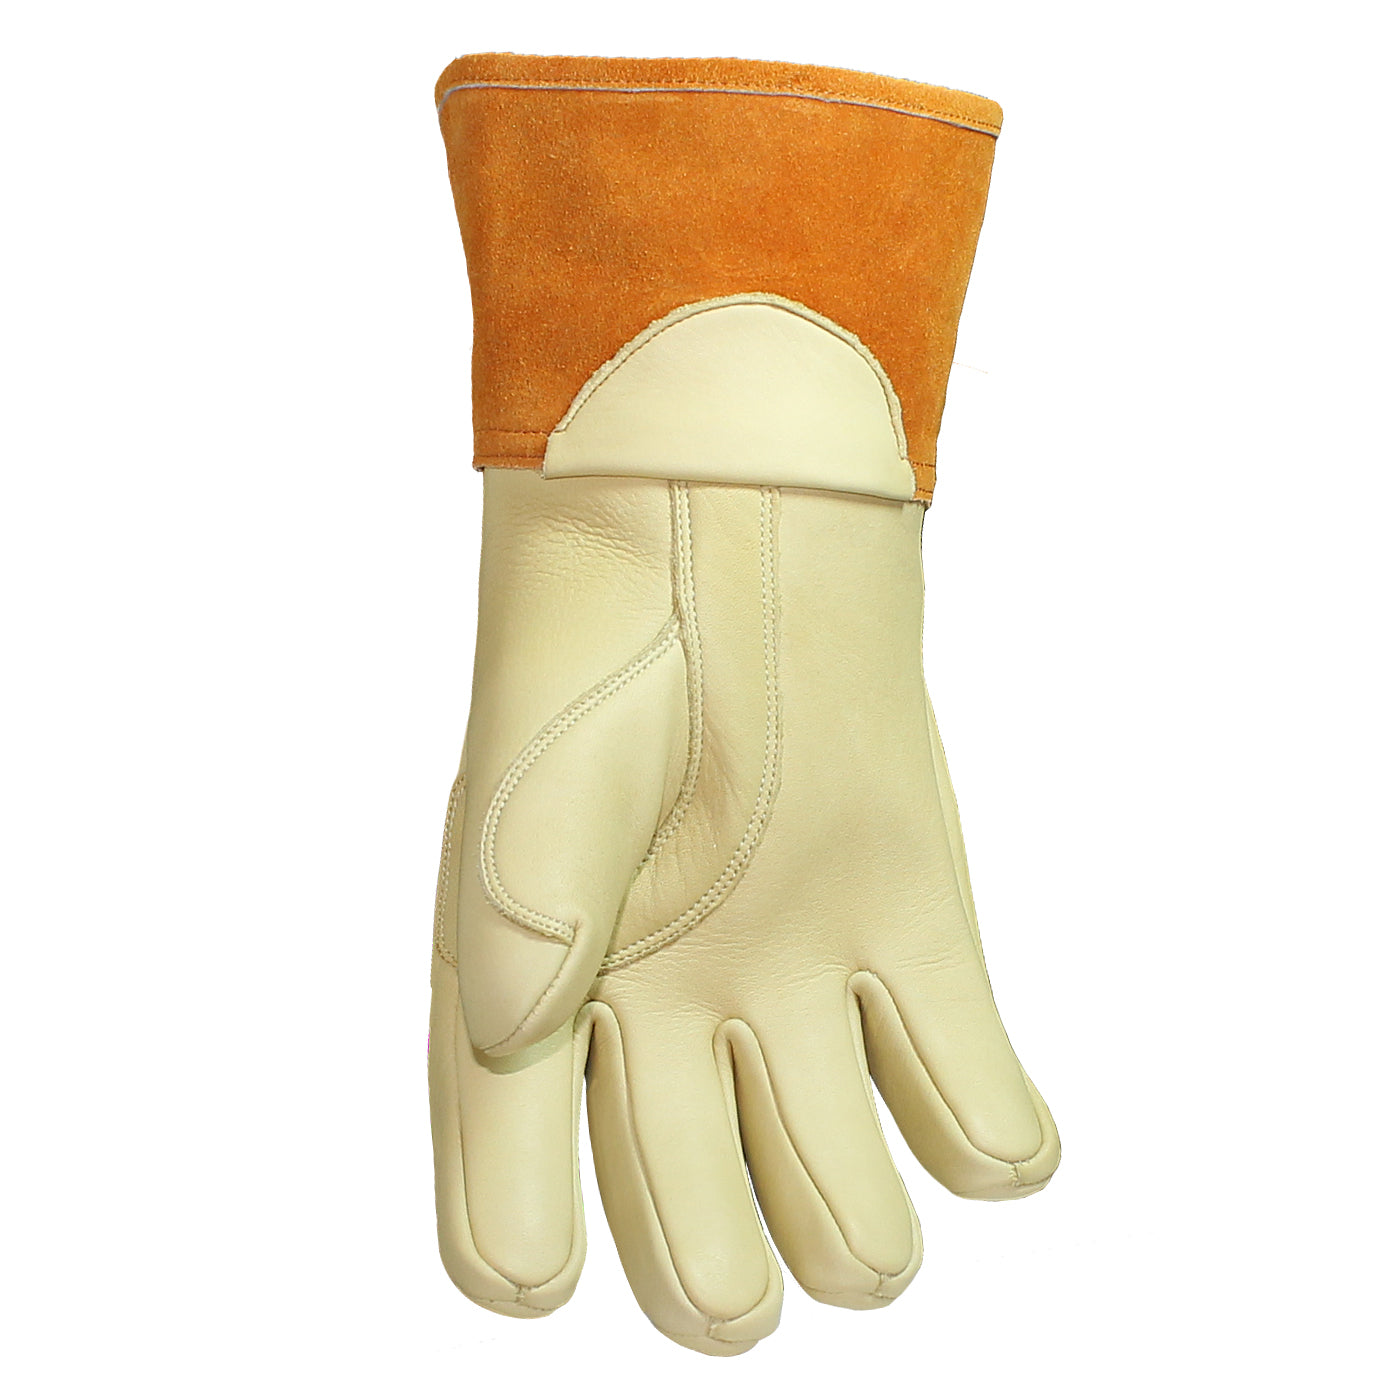 10 Cut Resistant Secondary Protector 9 - 9.5